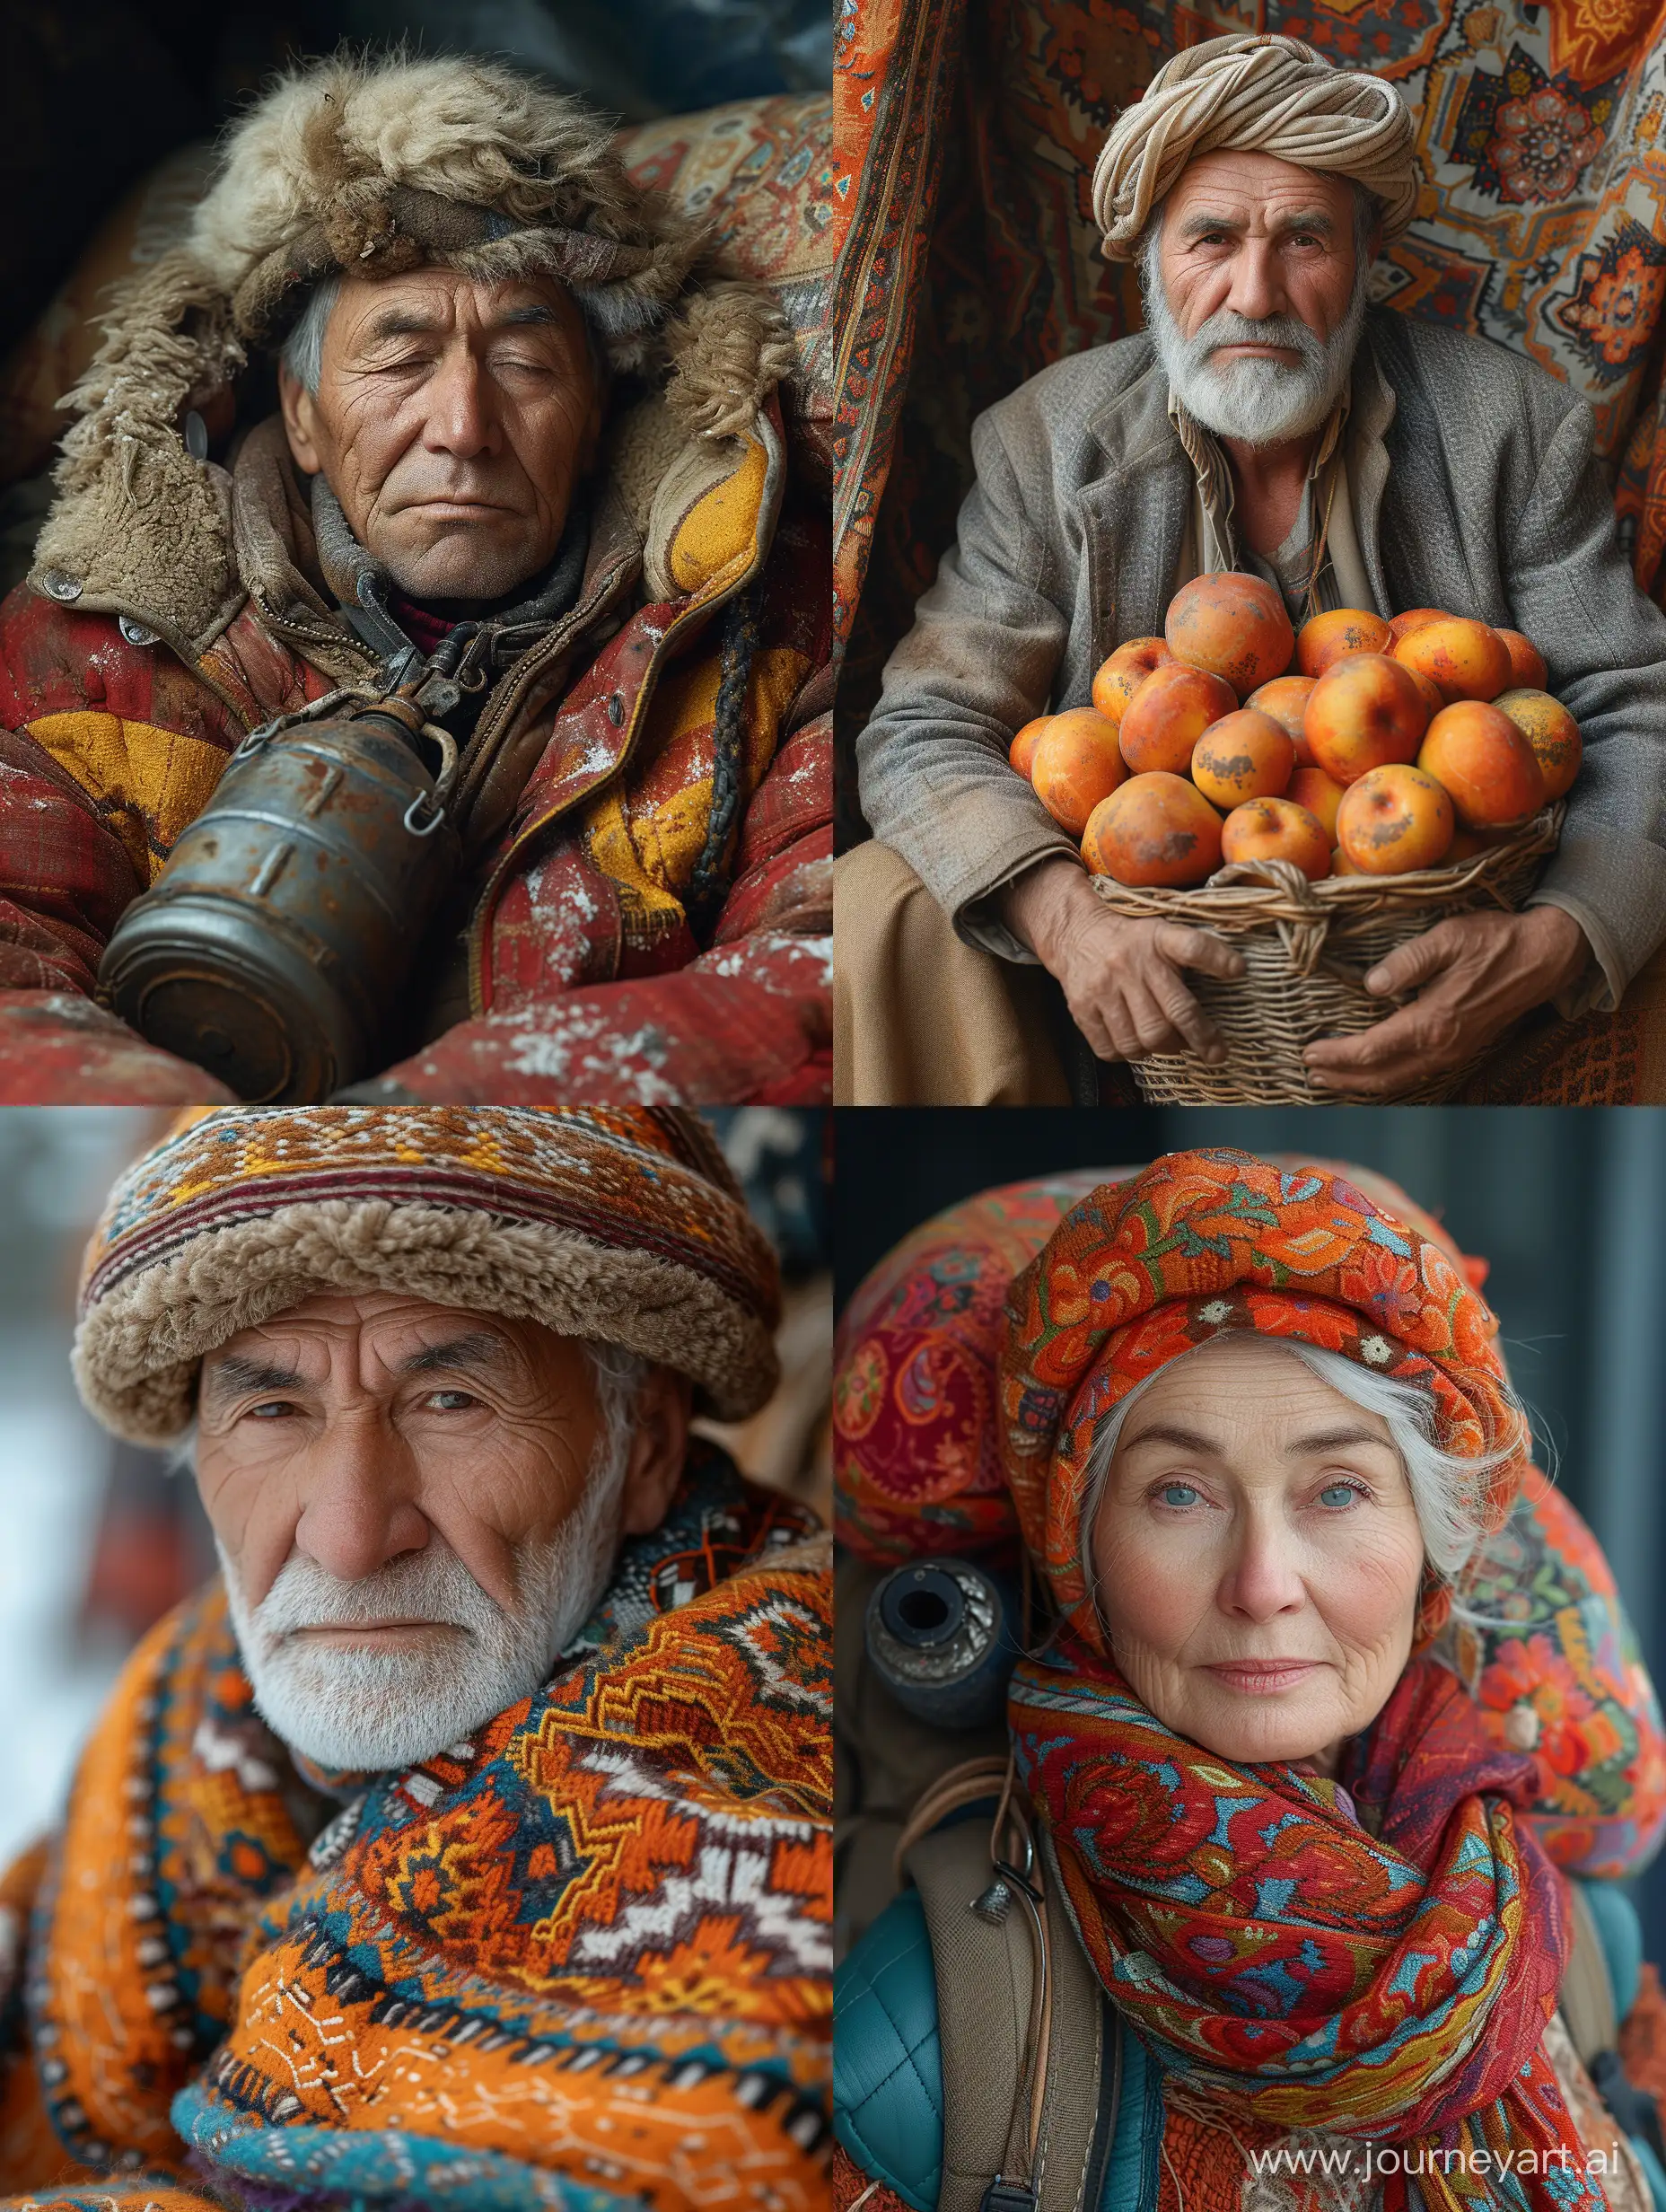 A realistic picture of uzbekistan mayjor with bad air selling the gas/ accuracy, focus, and very fine details on fabrics, skin, and skin --stylize 750 --v 6